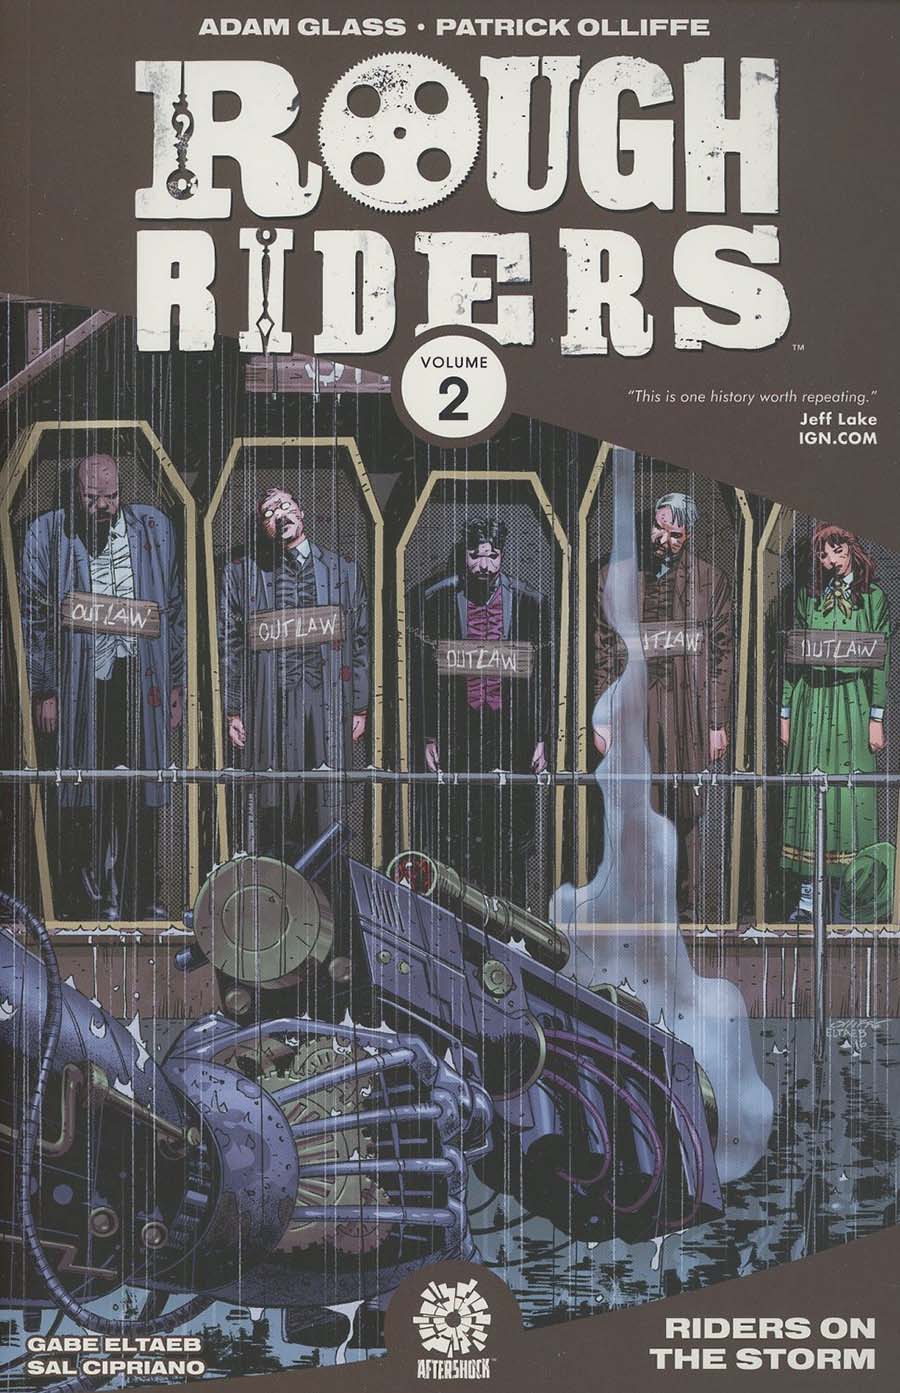 Rough Riders Vol 2 Riders On The Storm TP